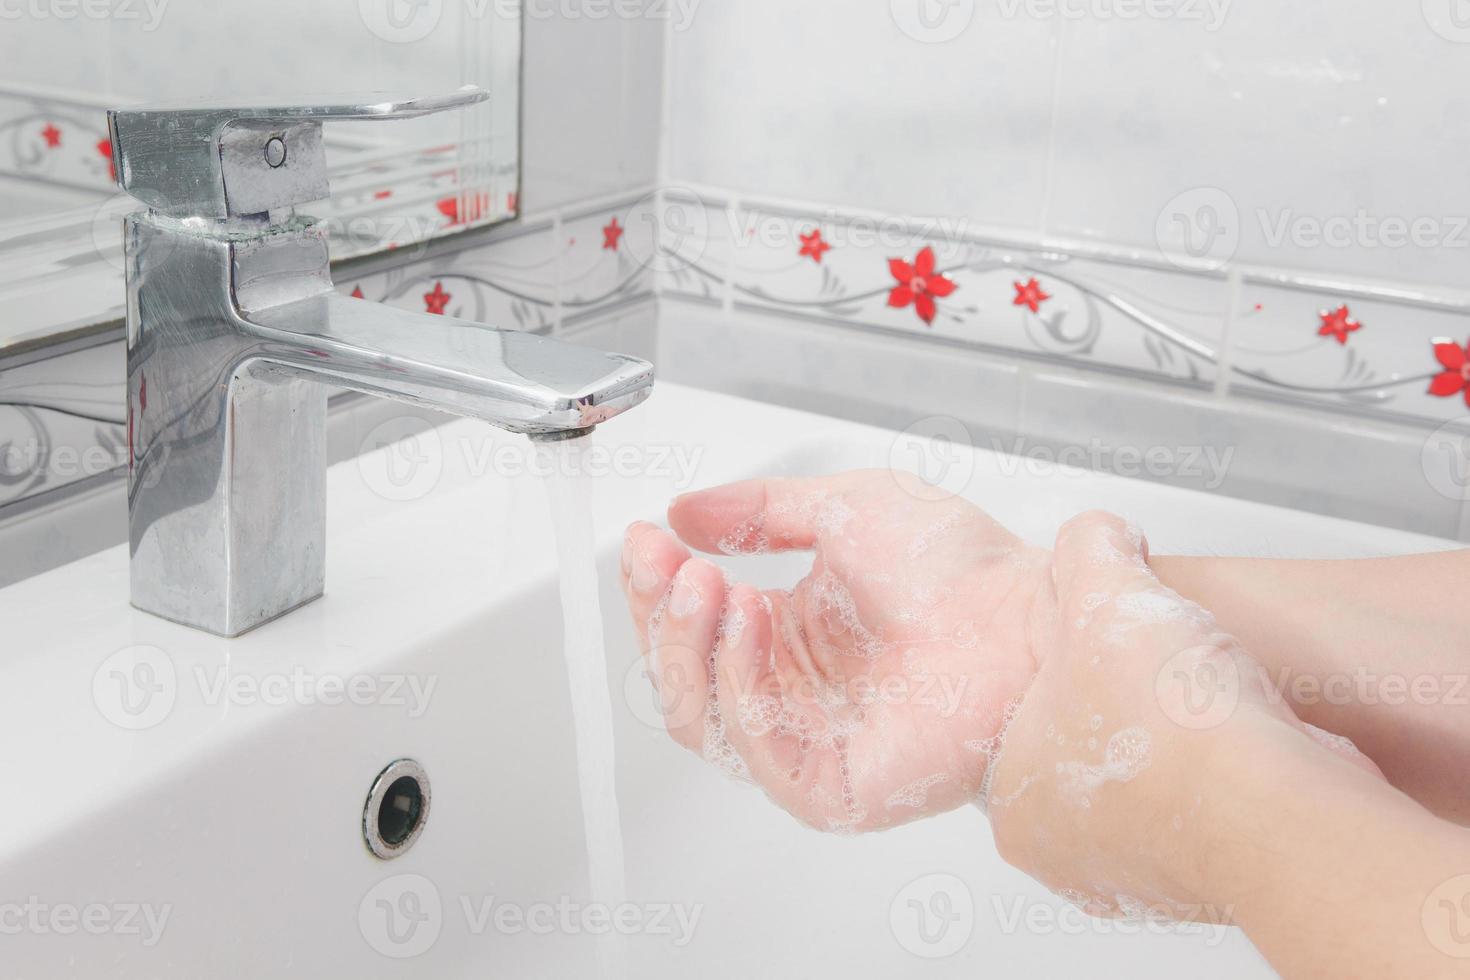 Both hands are washing their hands in the sink.Hygiene concept. photo